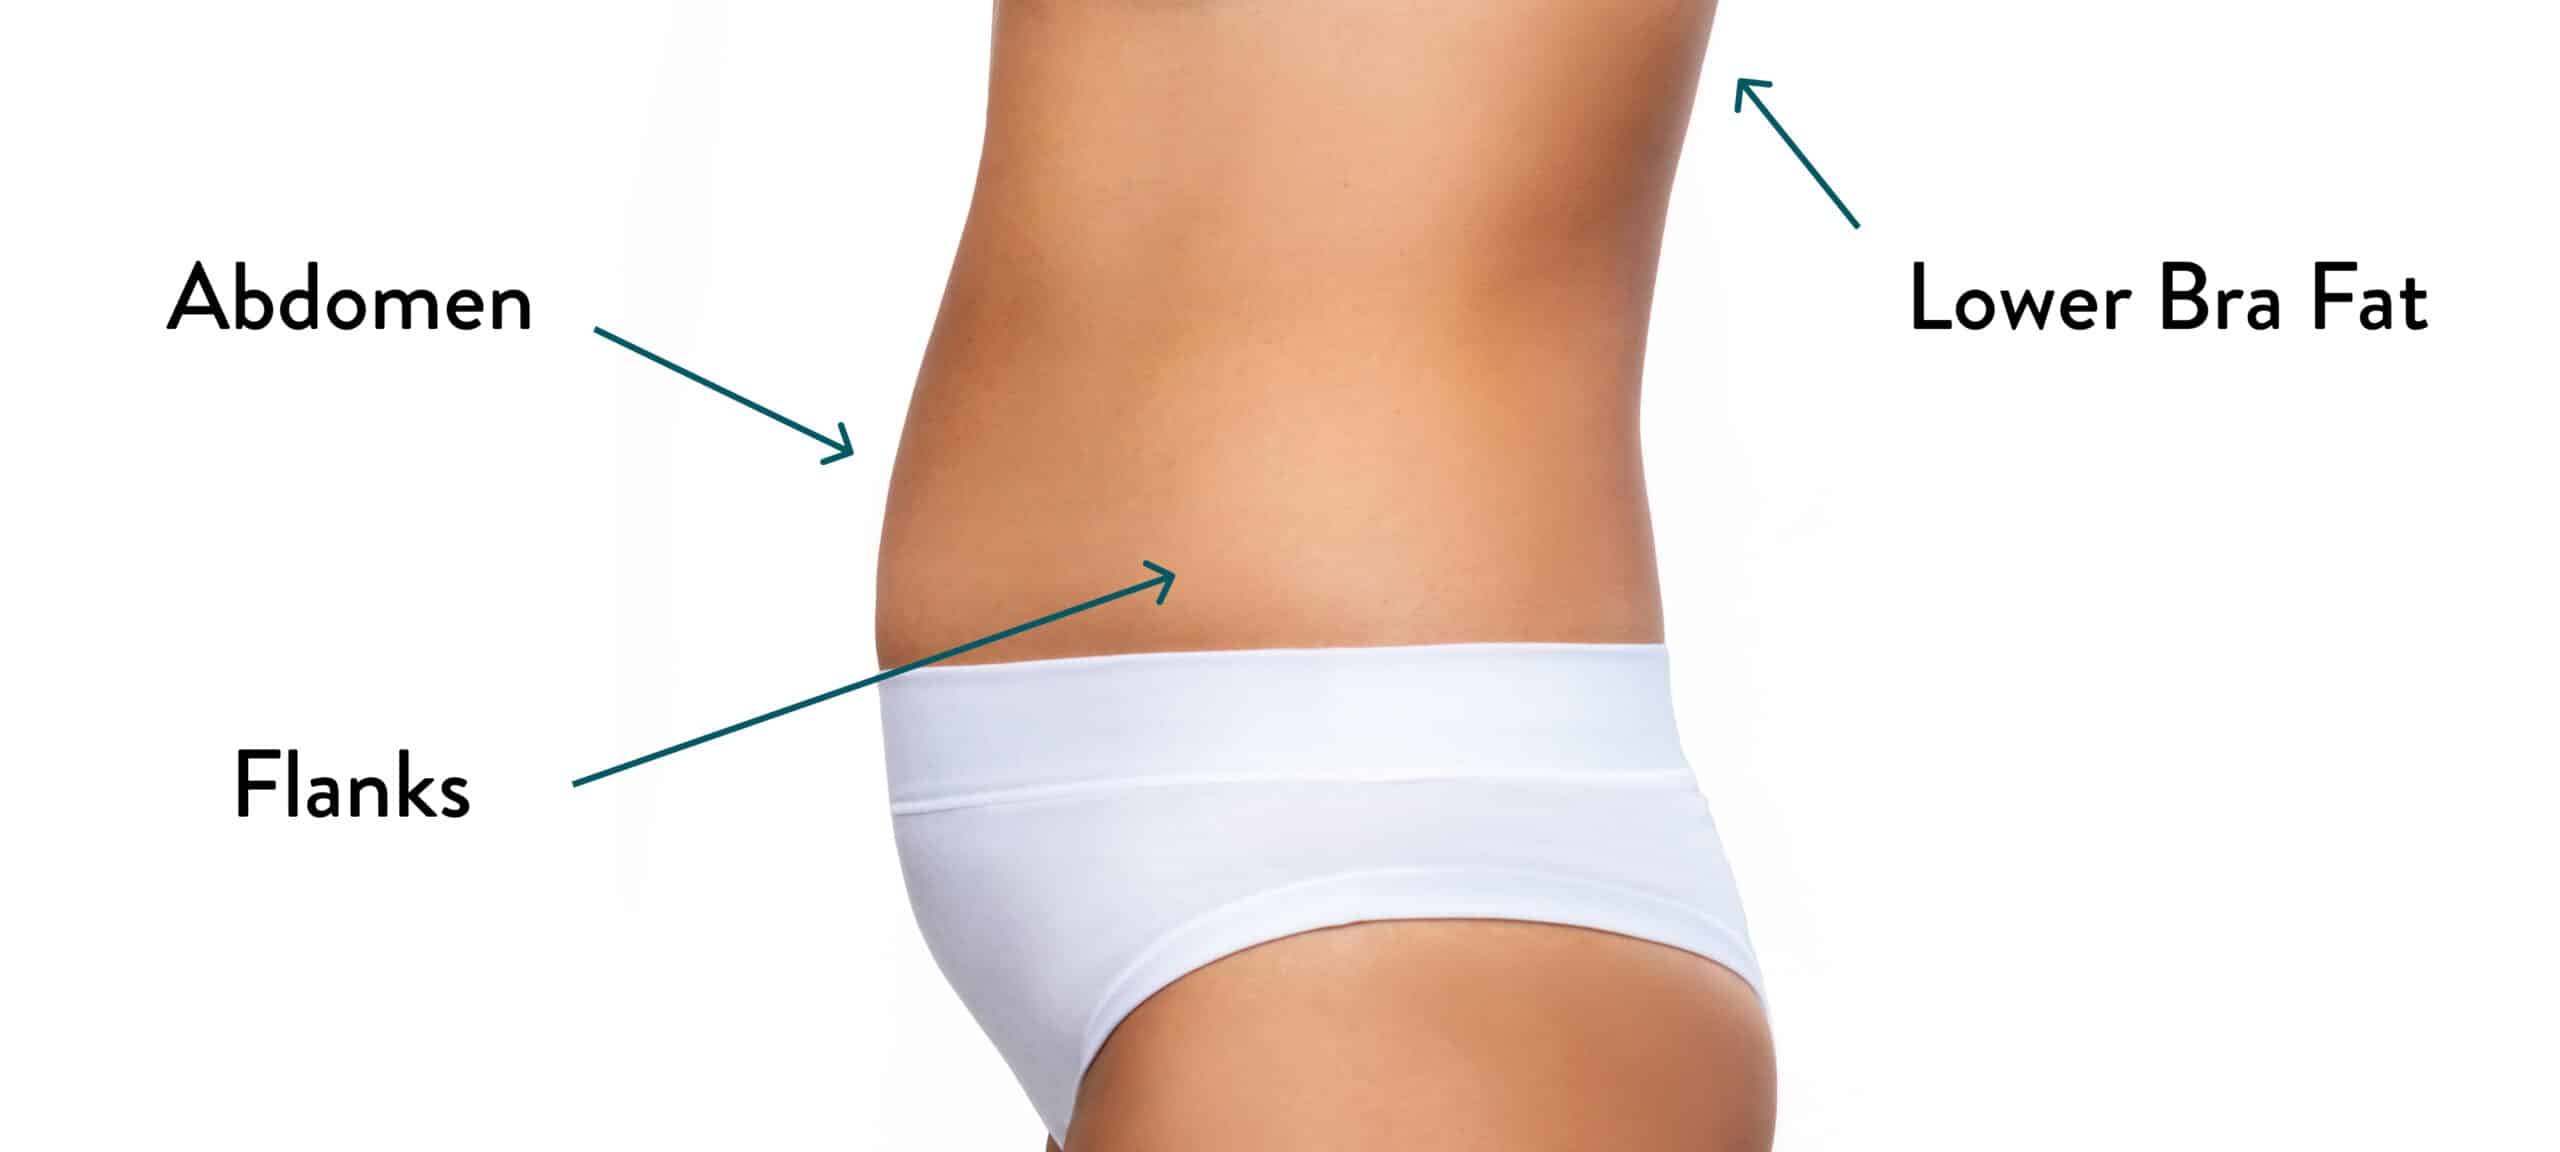 Should I get a second opinion 1.5 weeks after inner thigh lipo and